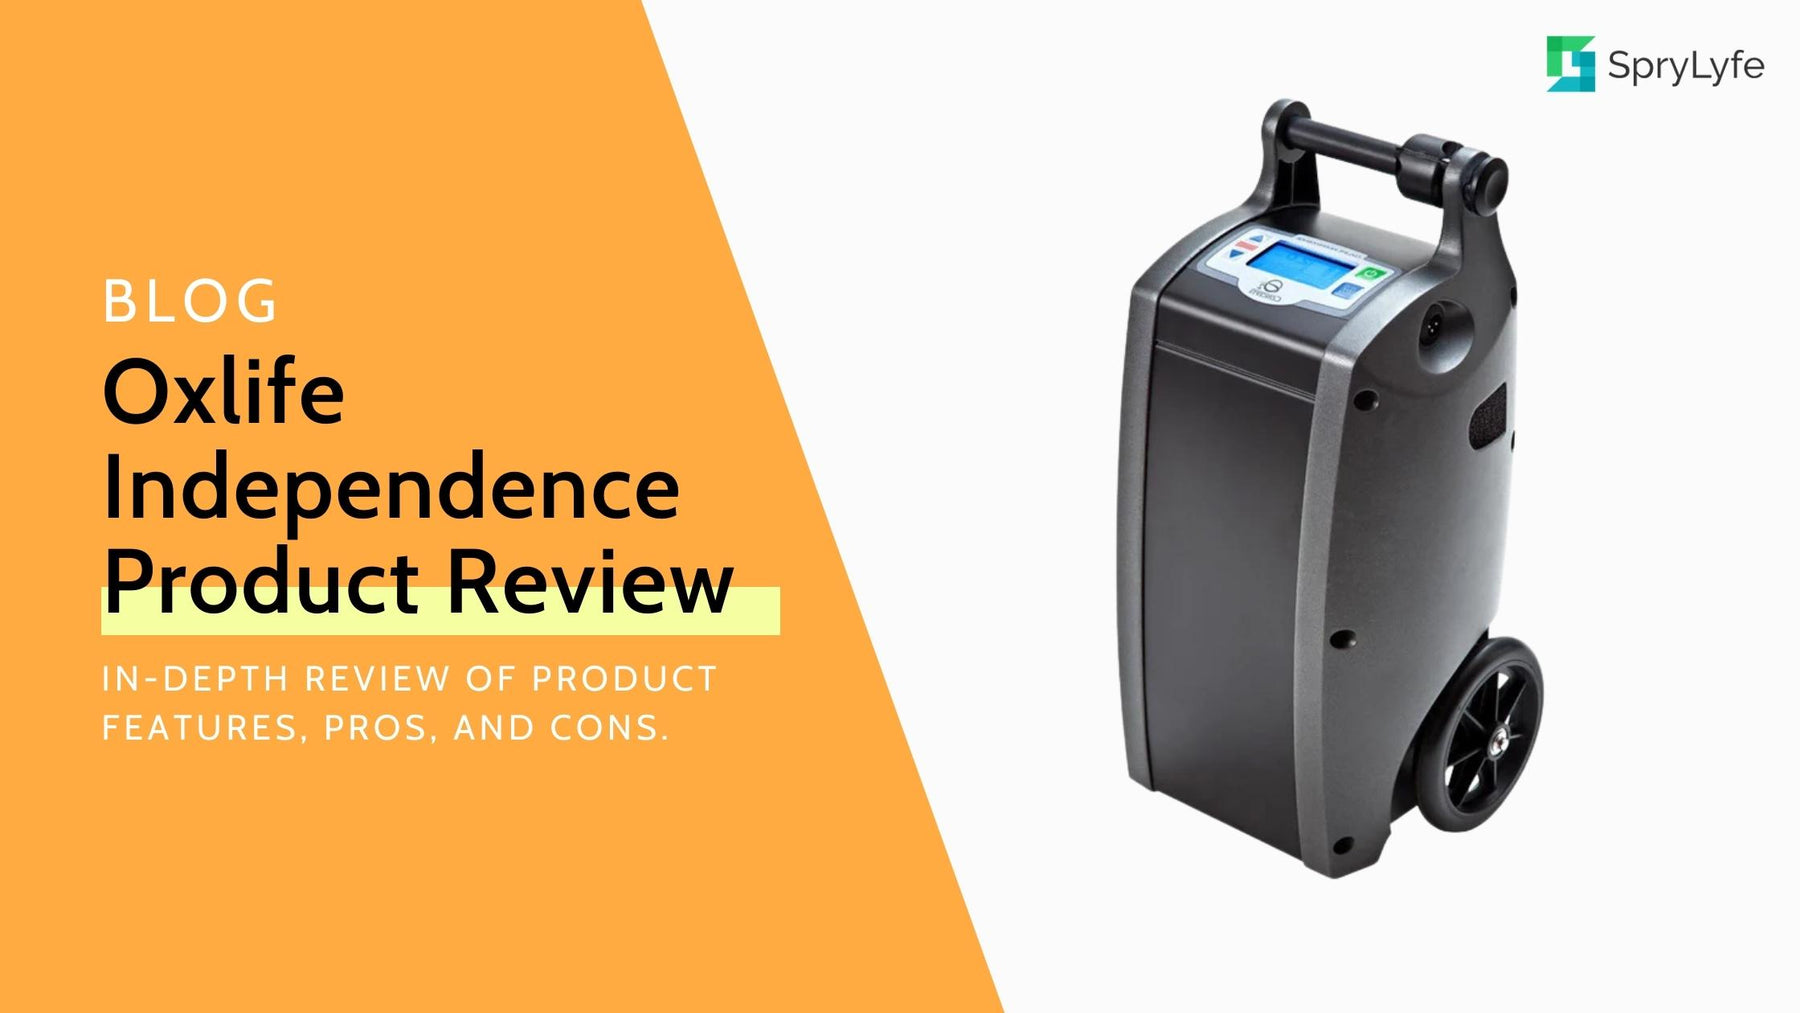 Oxlife Independence Portable Oxygen Concentrator Review